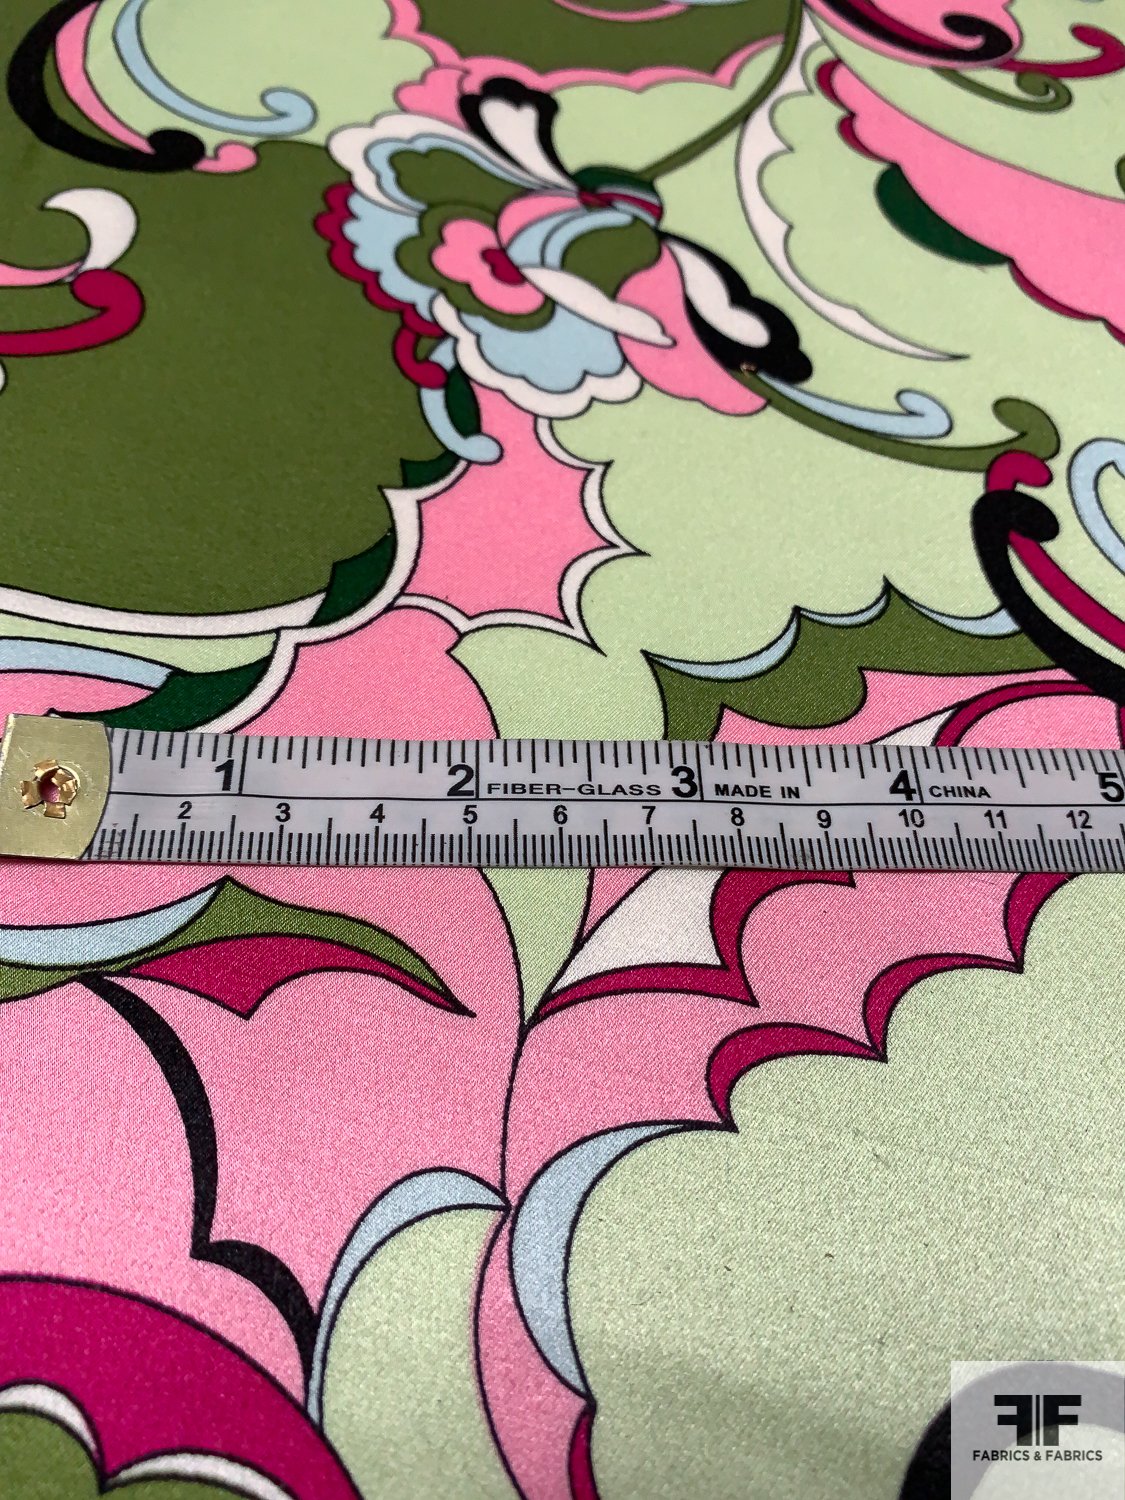 Pucci-esque Paisley-Like Printed Silk Charmeuse - Olive Green / Light Green  / Pink Magenta - Fabric by the Yard